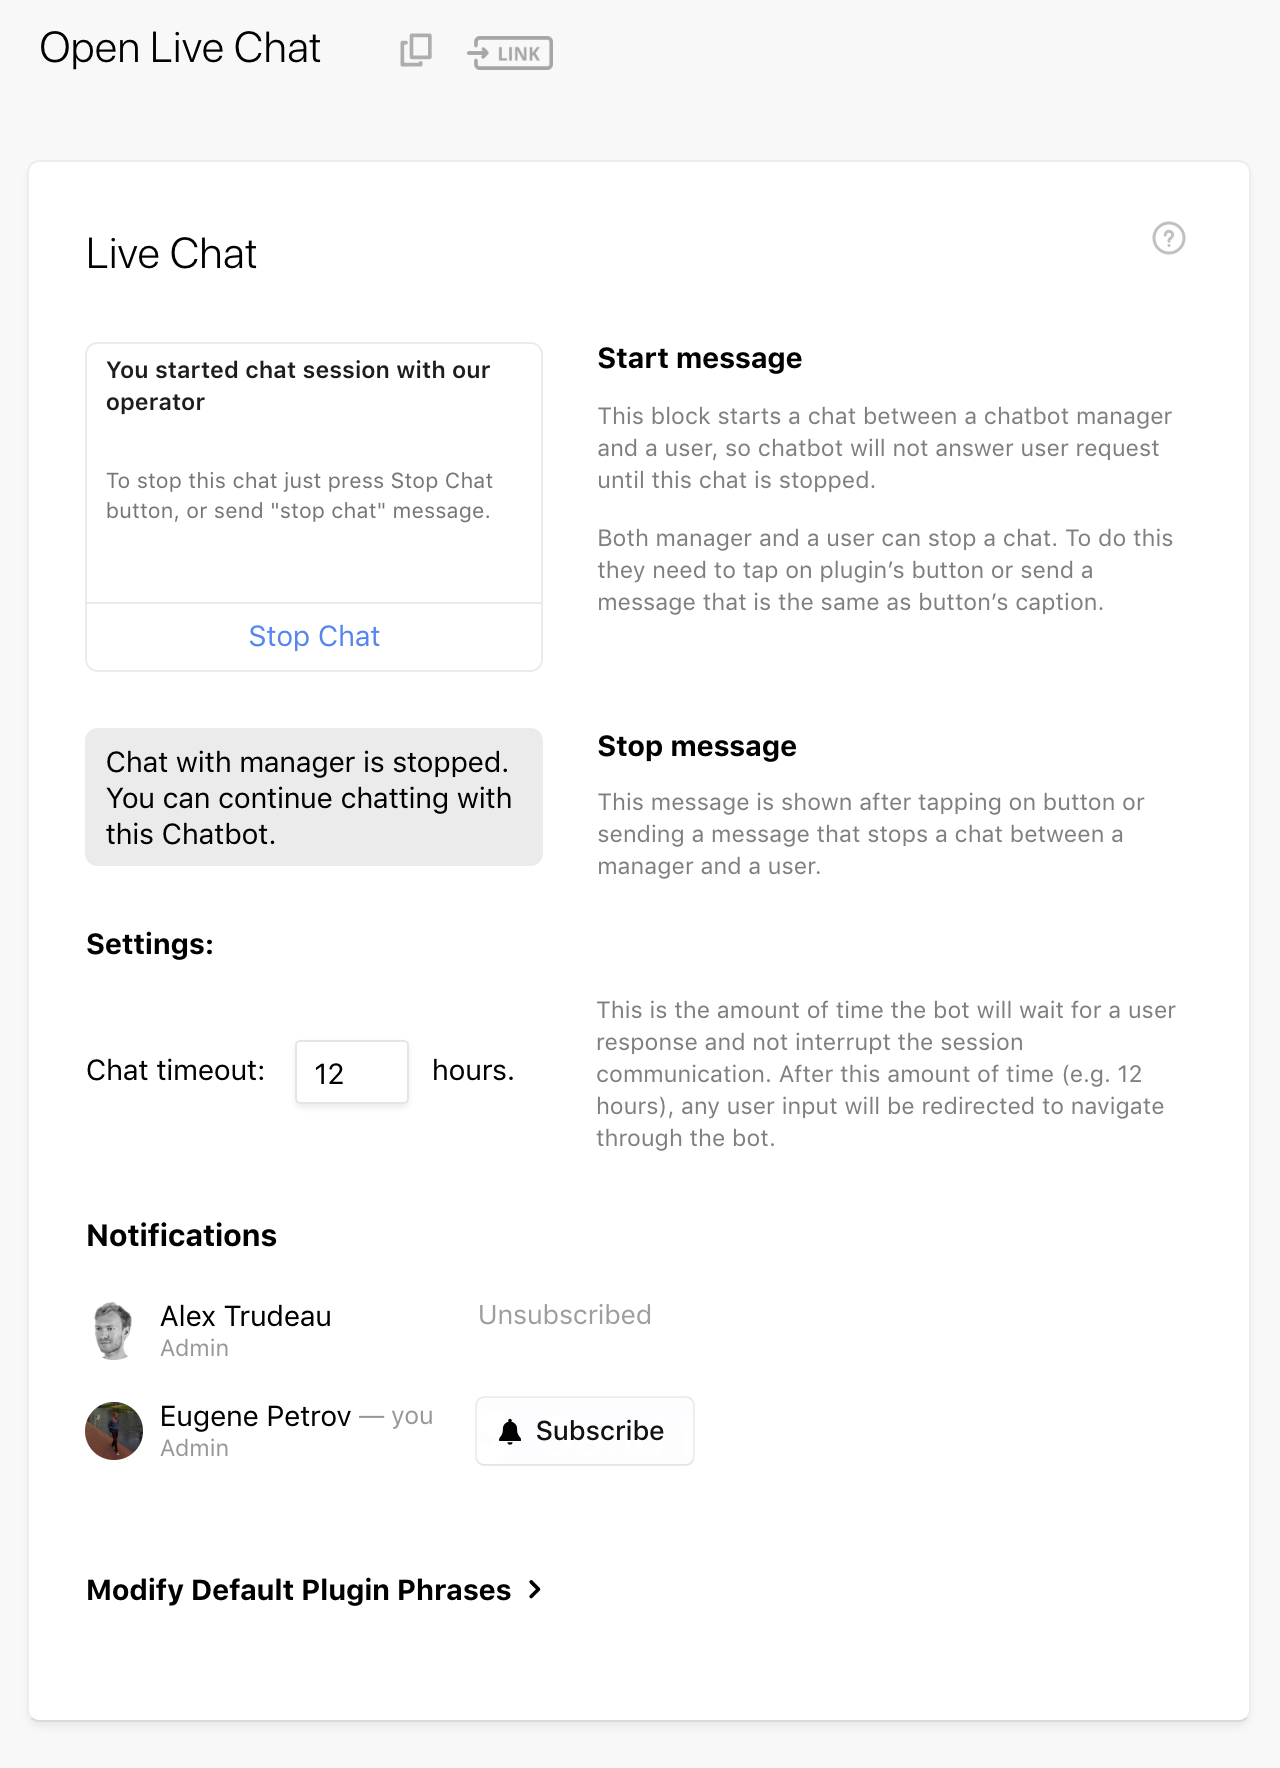 livechat-example-plugin.png